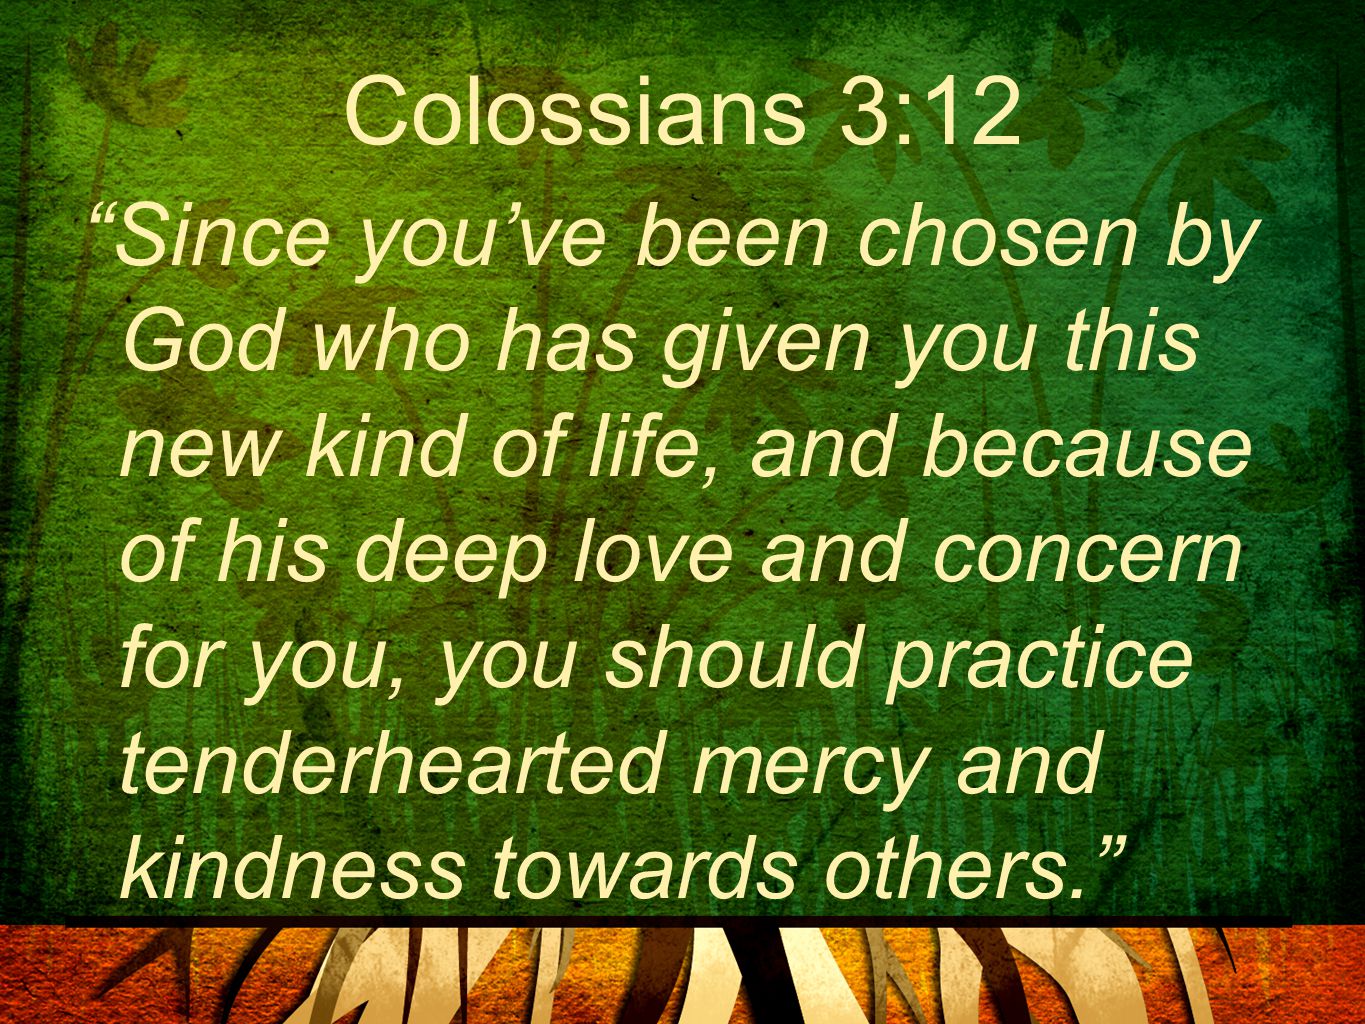 Colossians 3:12 Since you’ve been chosen by God who has given you this new kind of life, and because of his deep love and concern for you, you should practice tenderhearted mercy and kindness towards others.